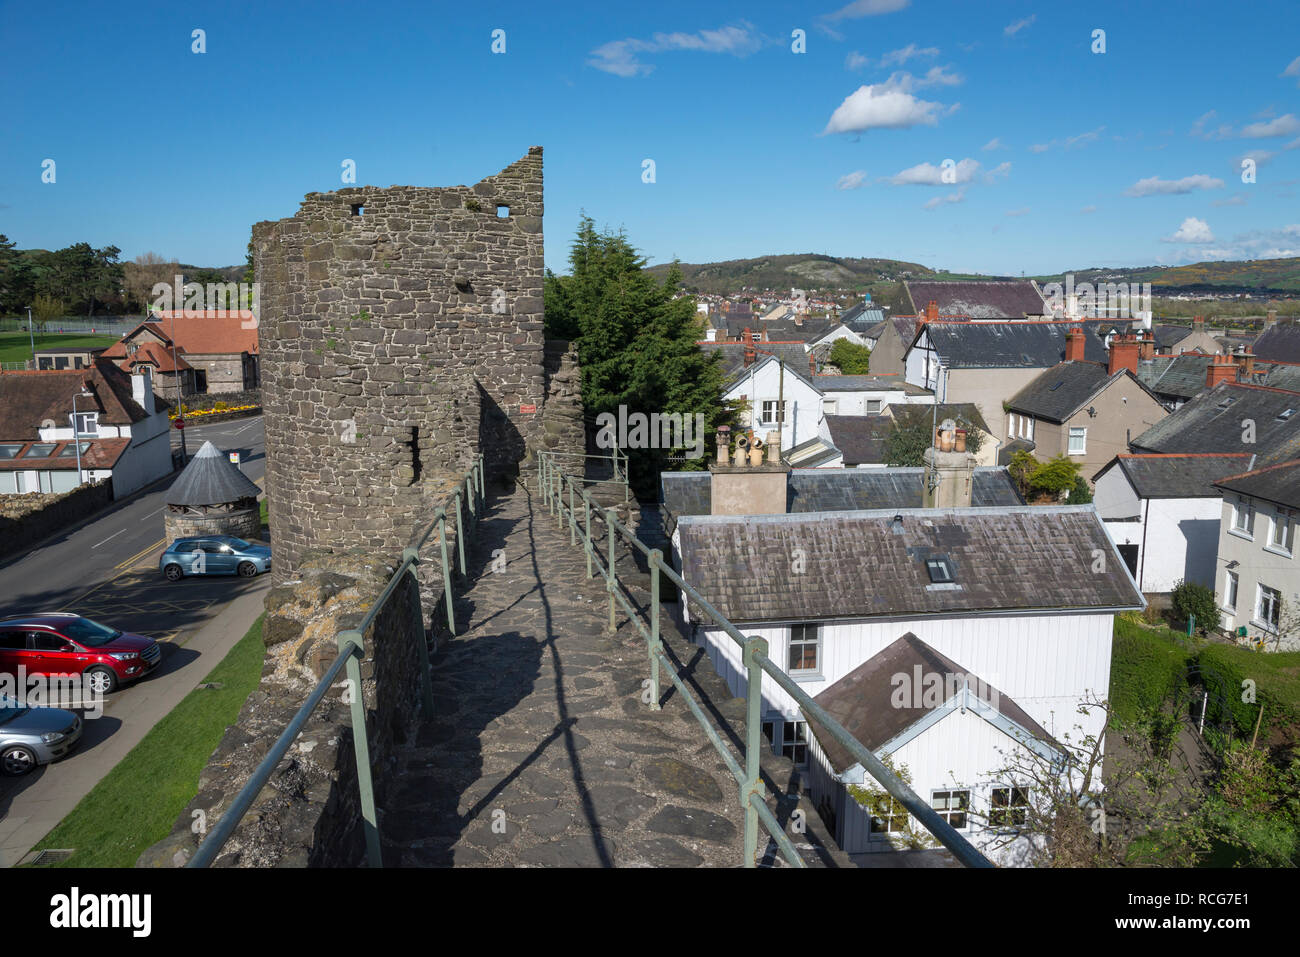 View from the old town walls of Conwy, a popular historic town in North Wales. Stock Photo